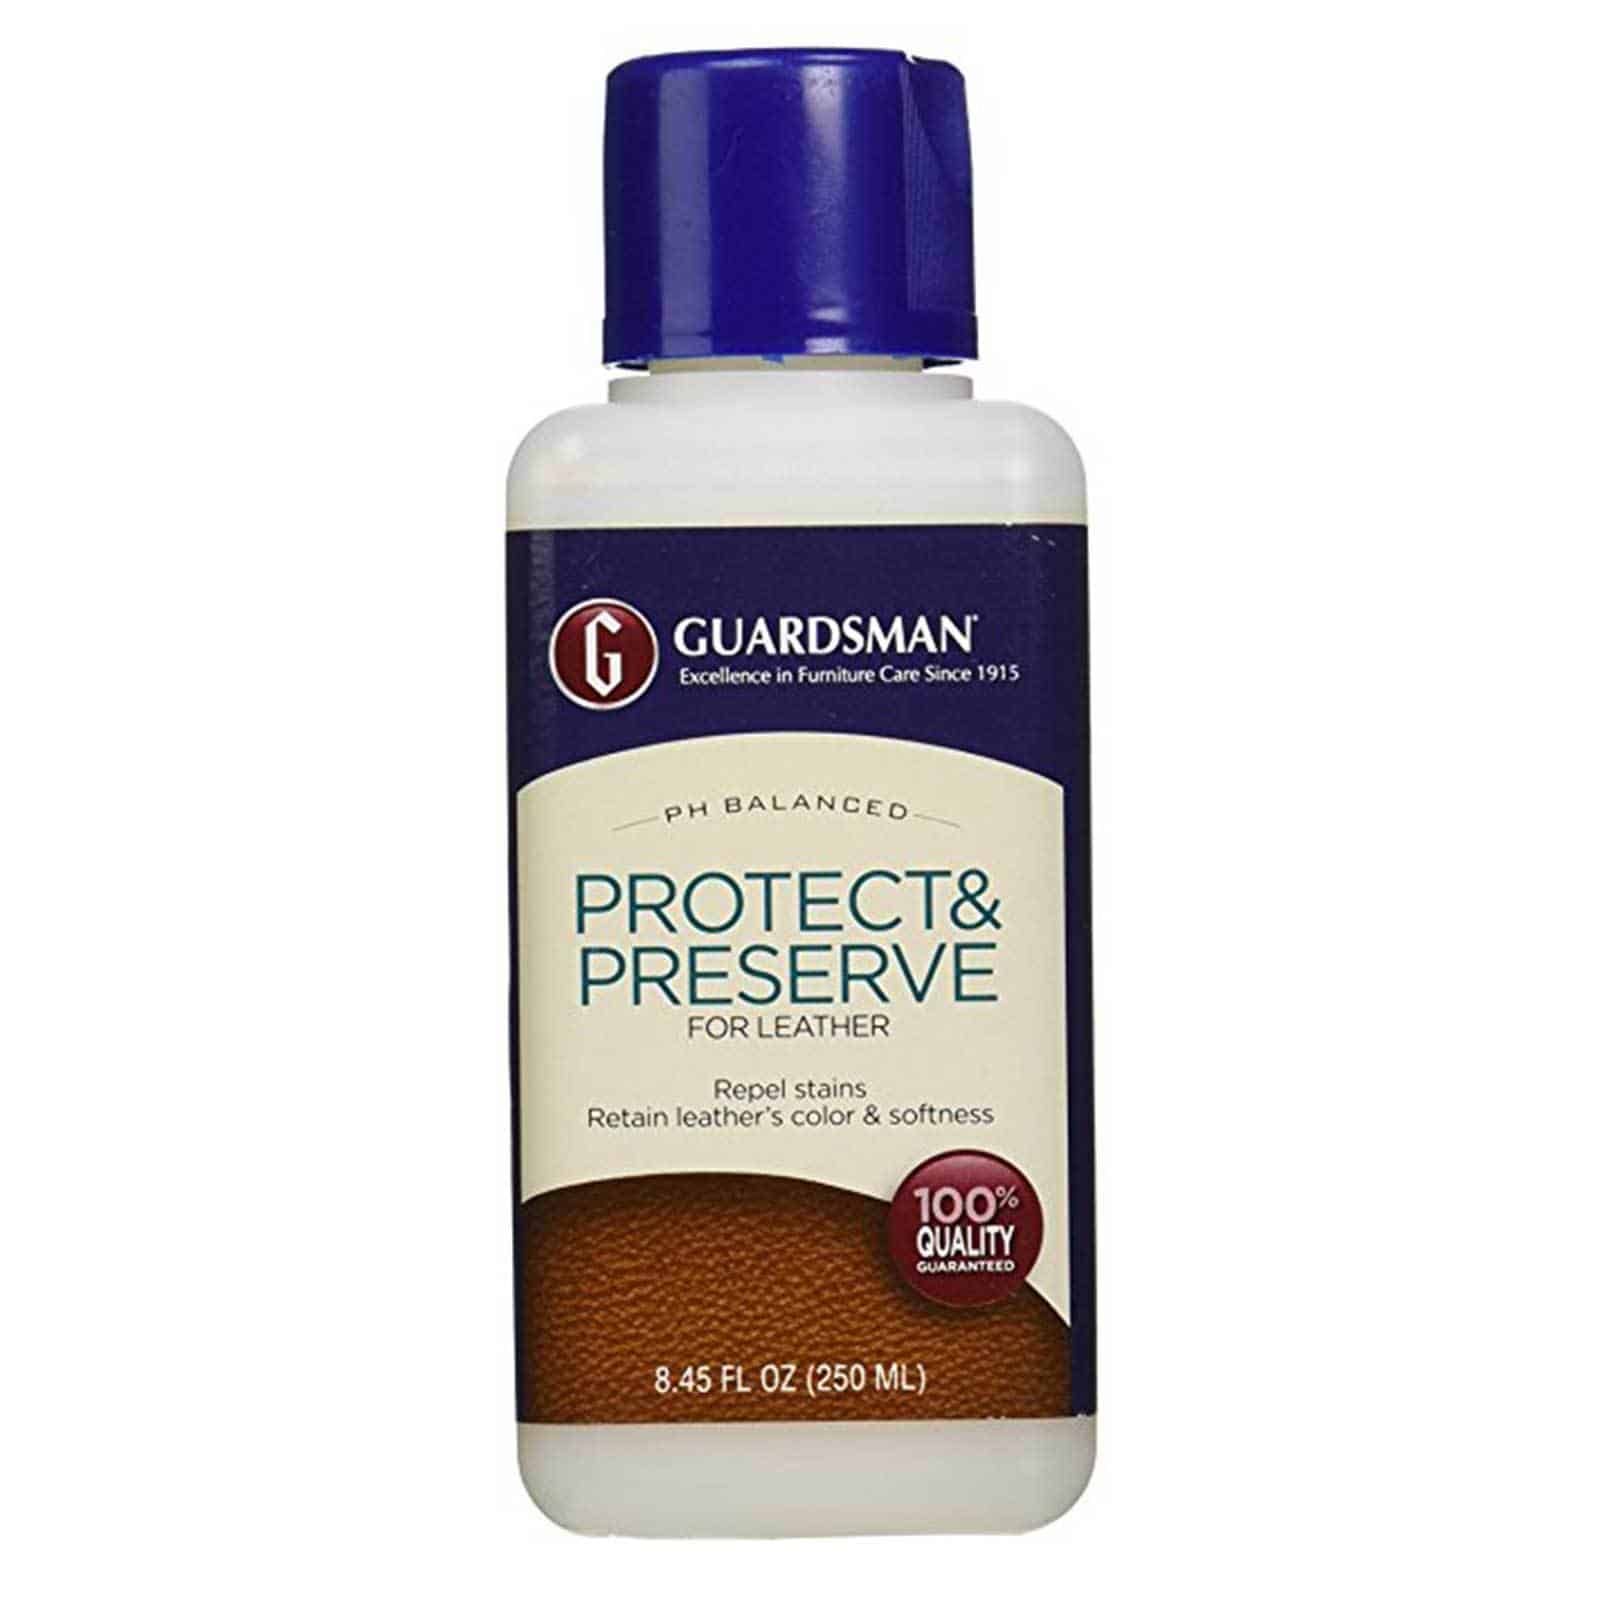 A blue bottle that protects & preserves leather by the brand Guardsman